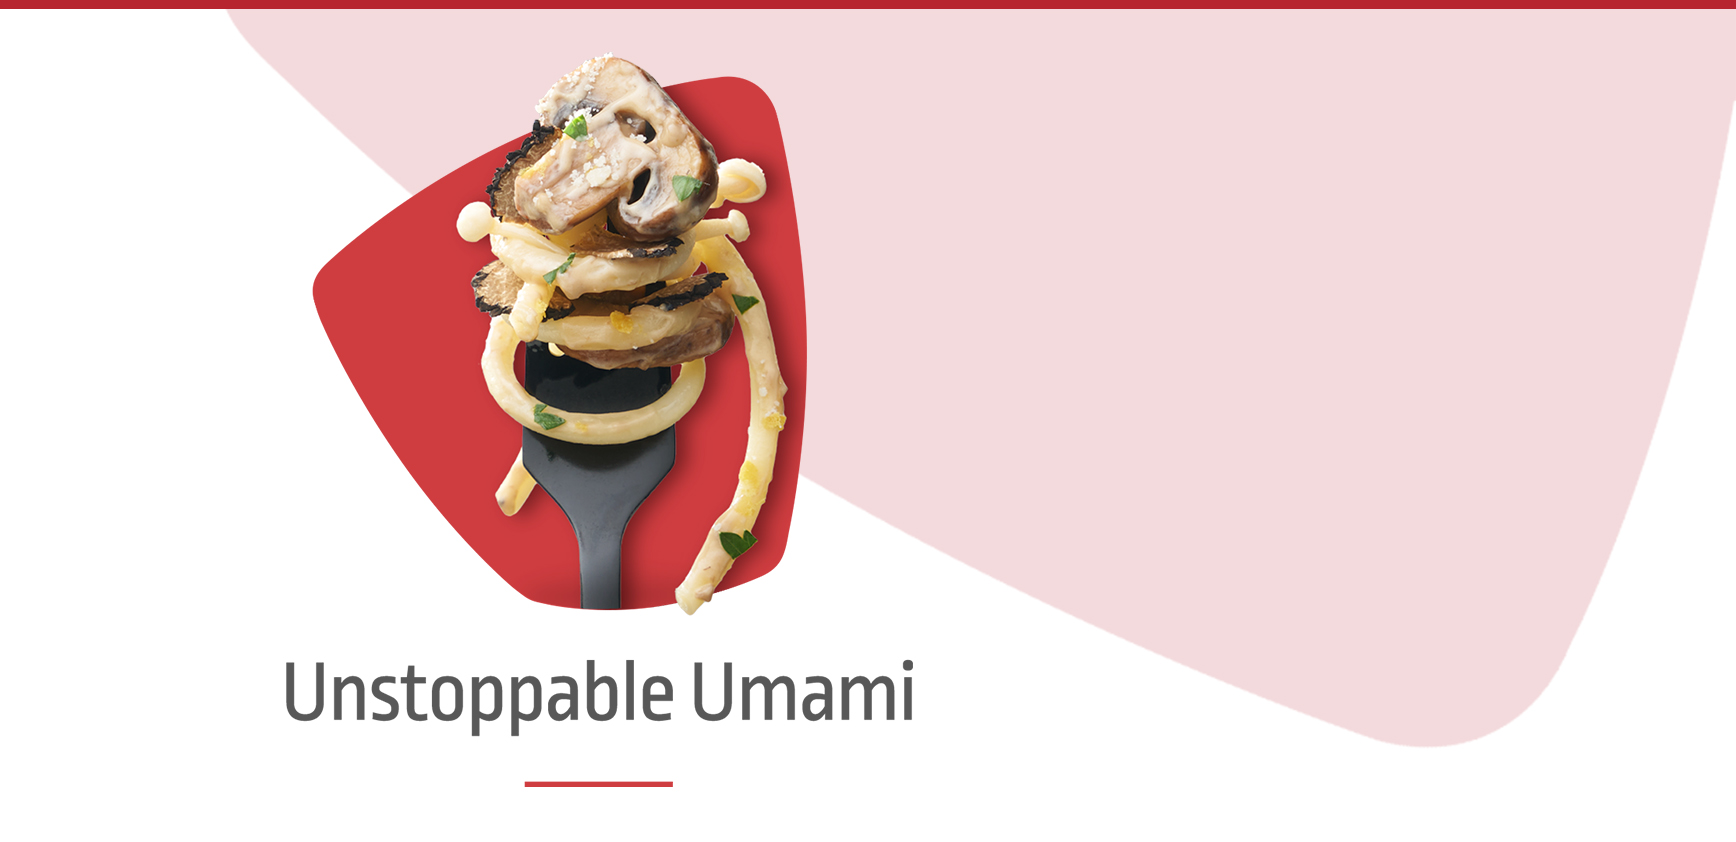 Unstoppable Umami Fork Pictured with Pasta and Mushrooms